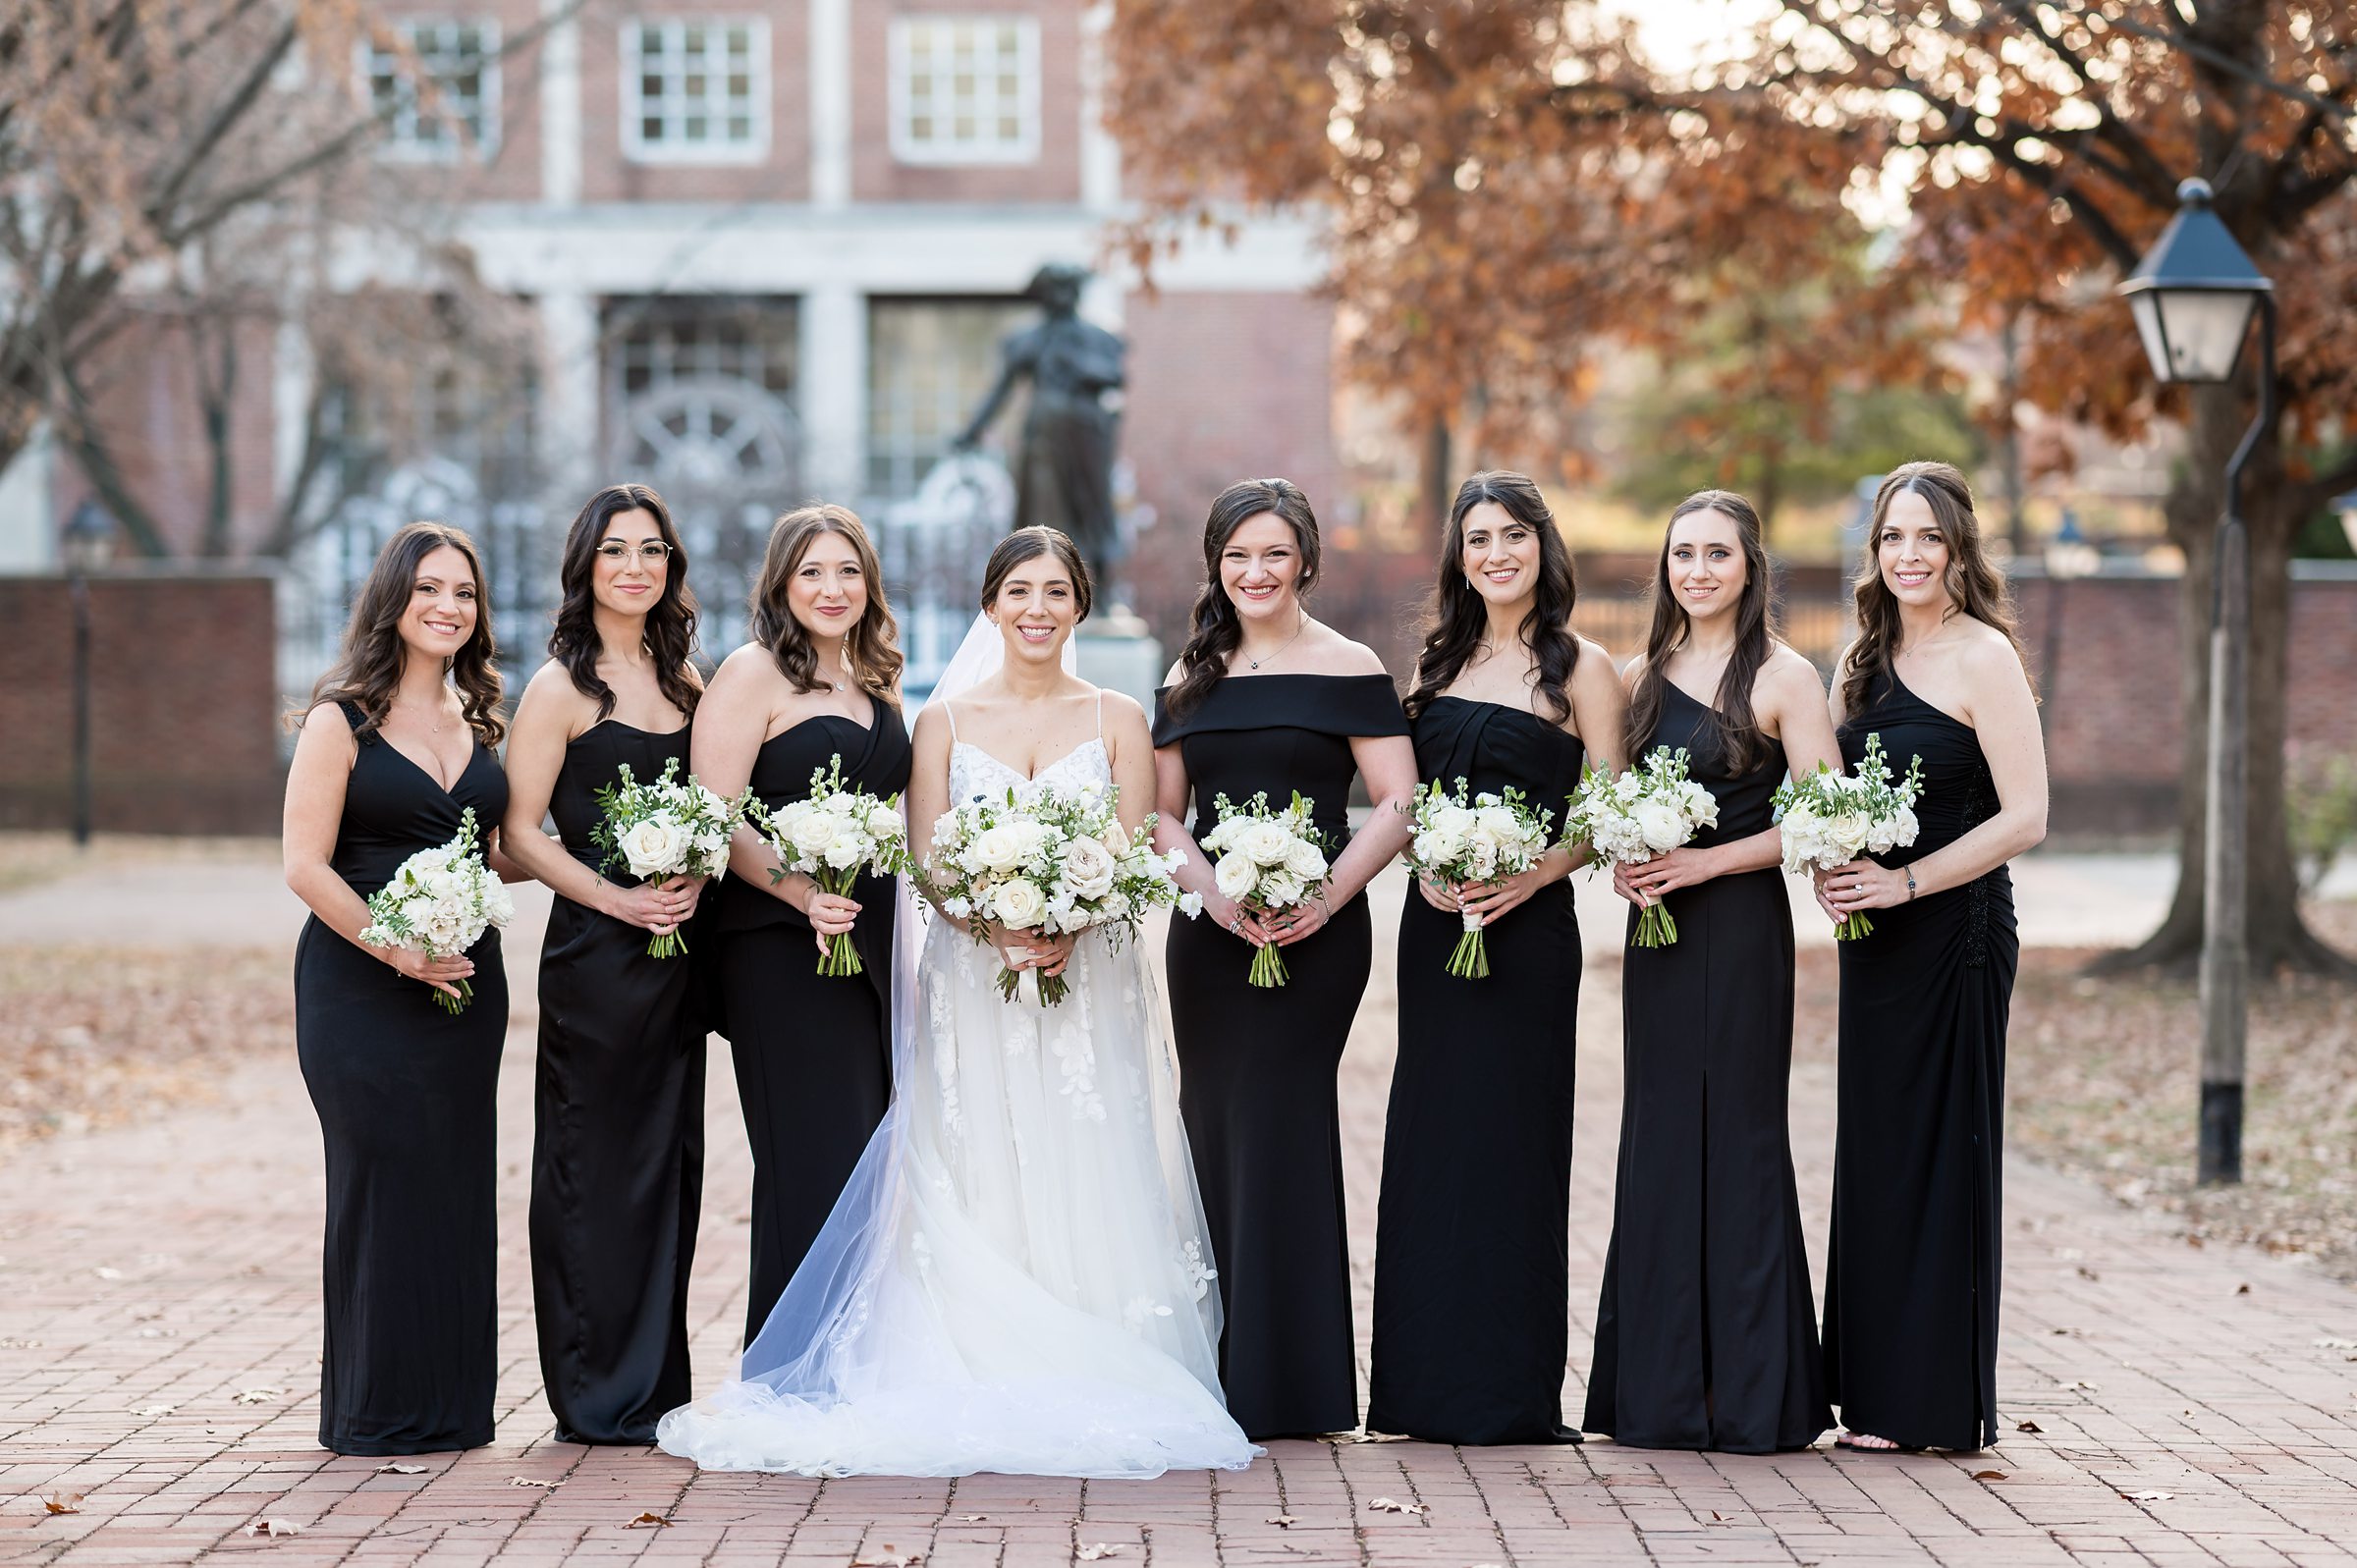 Bridesmaids in black dresses standing in front of a brick walkway at a Lilah Events wedding.